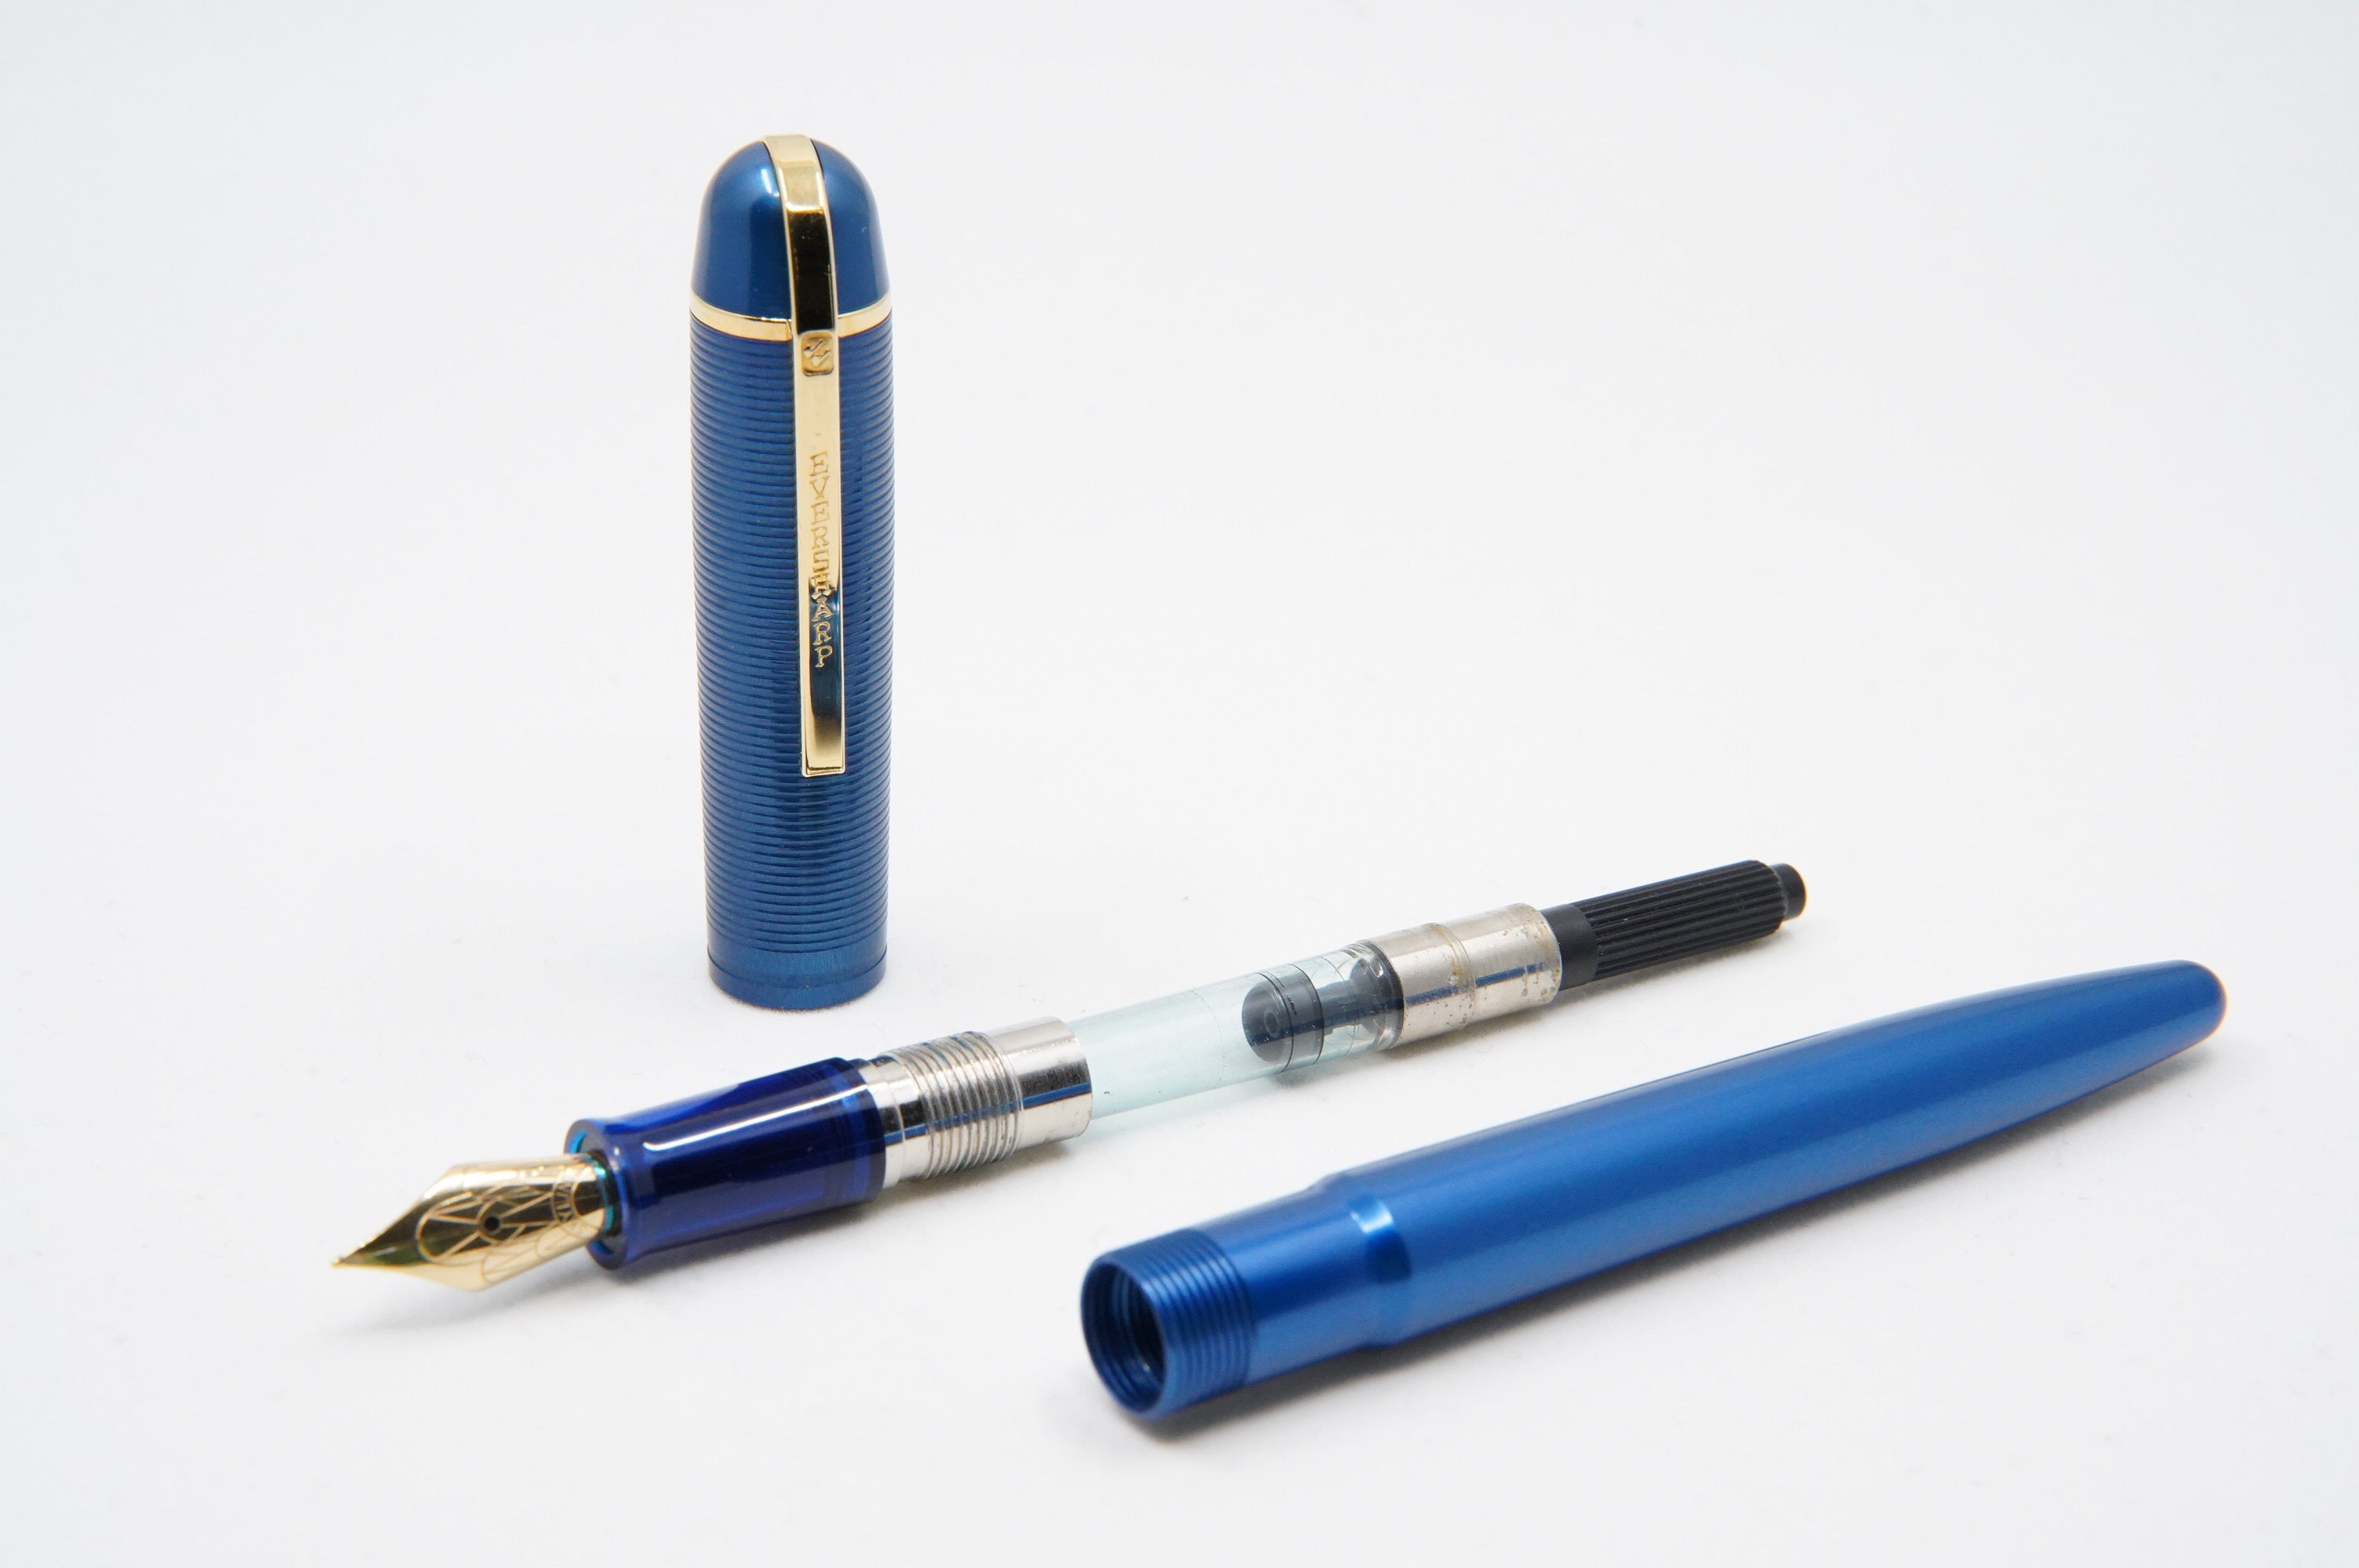 Wahl Eversharp Skyline FP Aluminum Blue - The iconic SKYLINE created by Henry Dreyfus in 1939